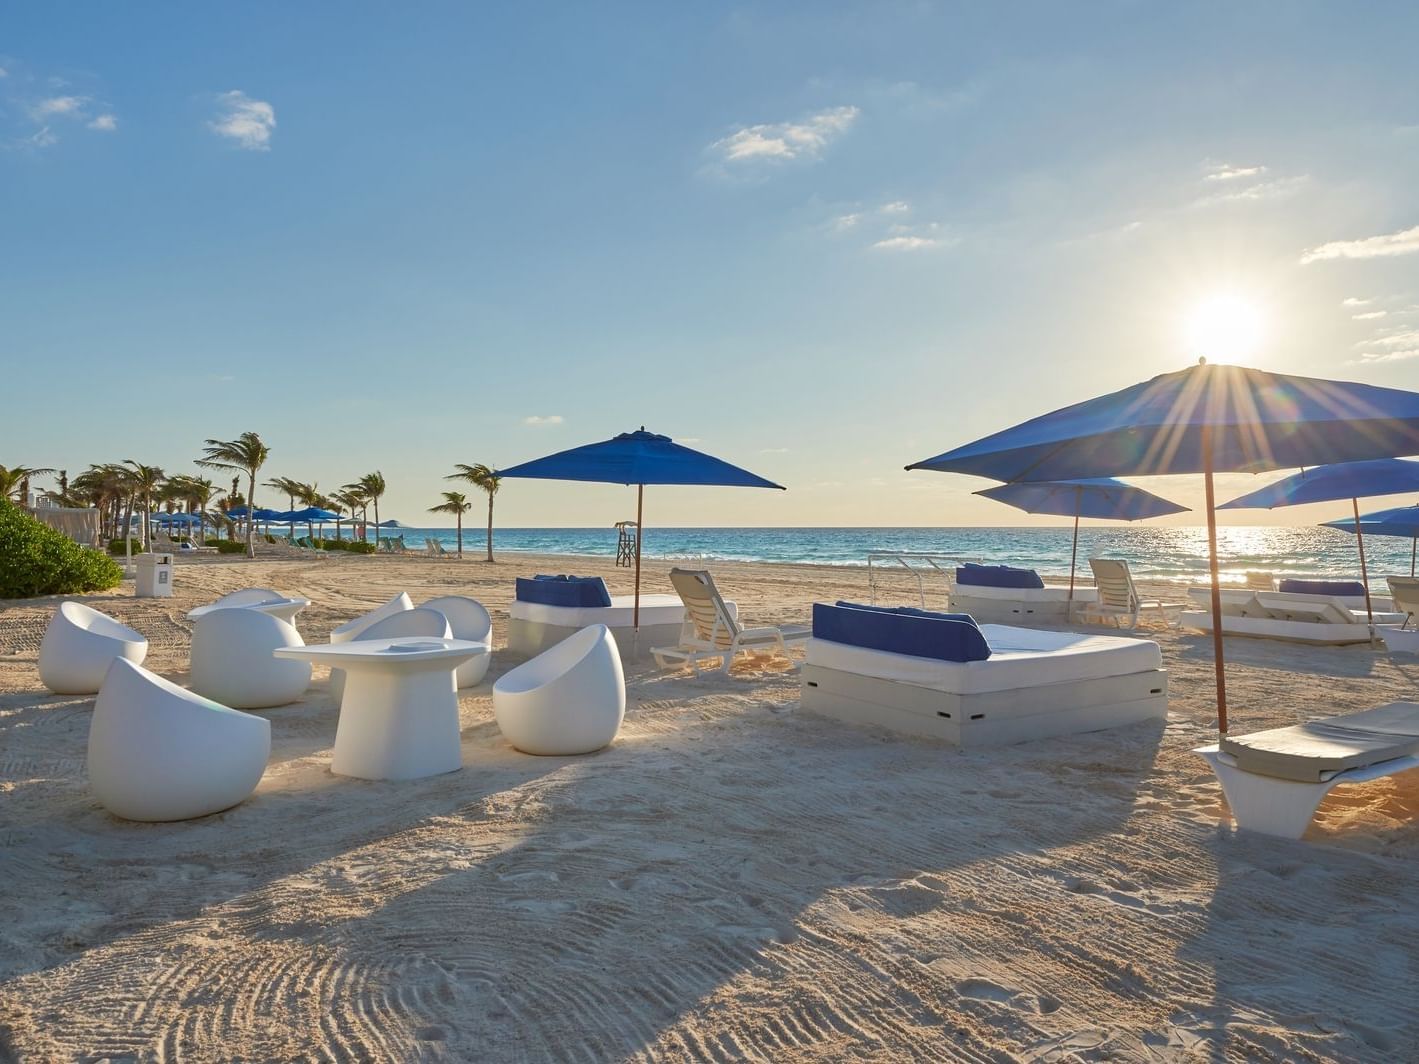 Lounge beds in beach at the La Coleccion Resorts
